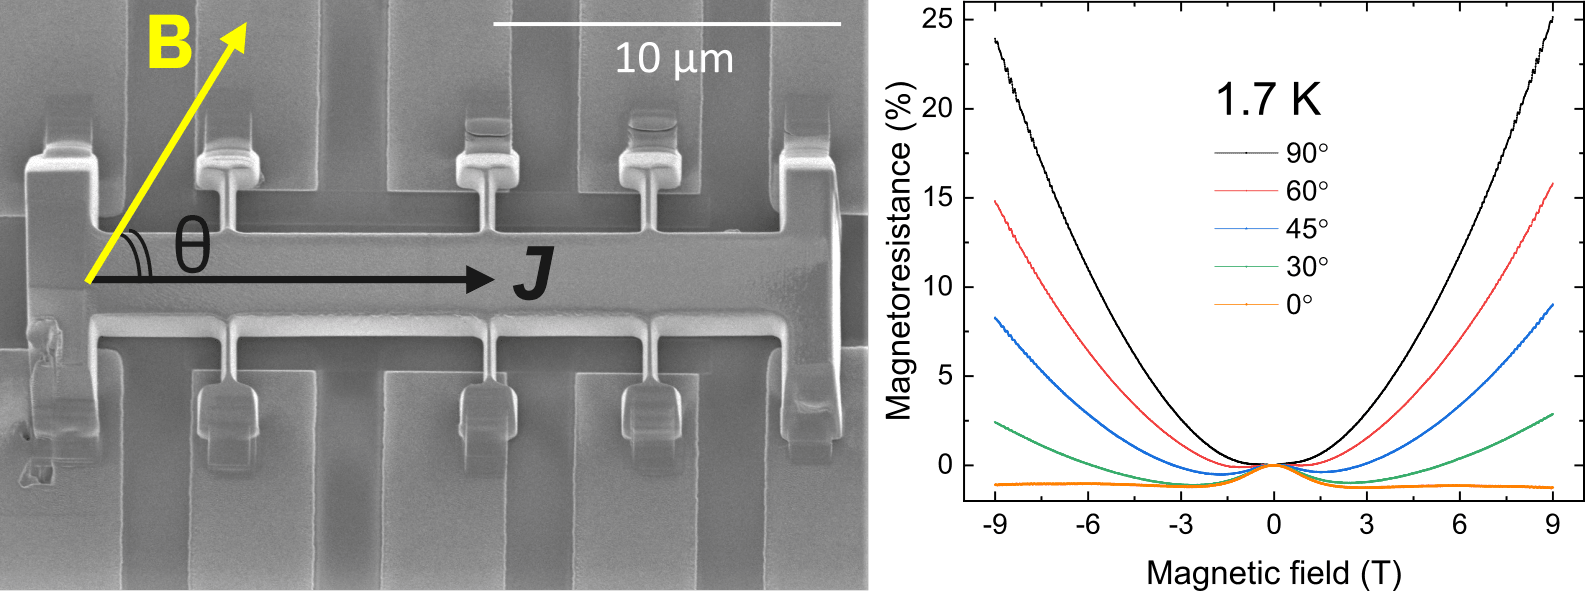 Scanning electron micrograph of a CoSi micro-scale Hall bar and magnetoresistance at 1.7 K upon variation of the angle between the applied magnetic field and the current density